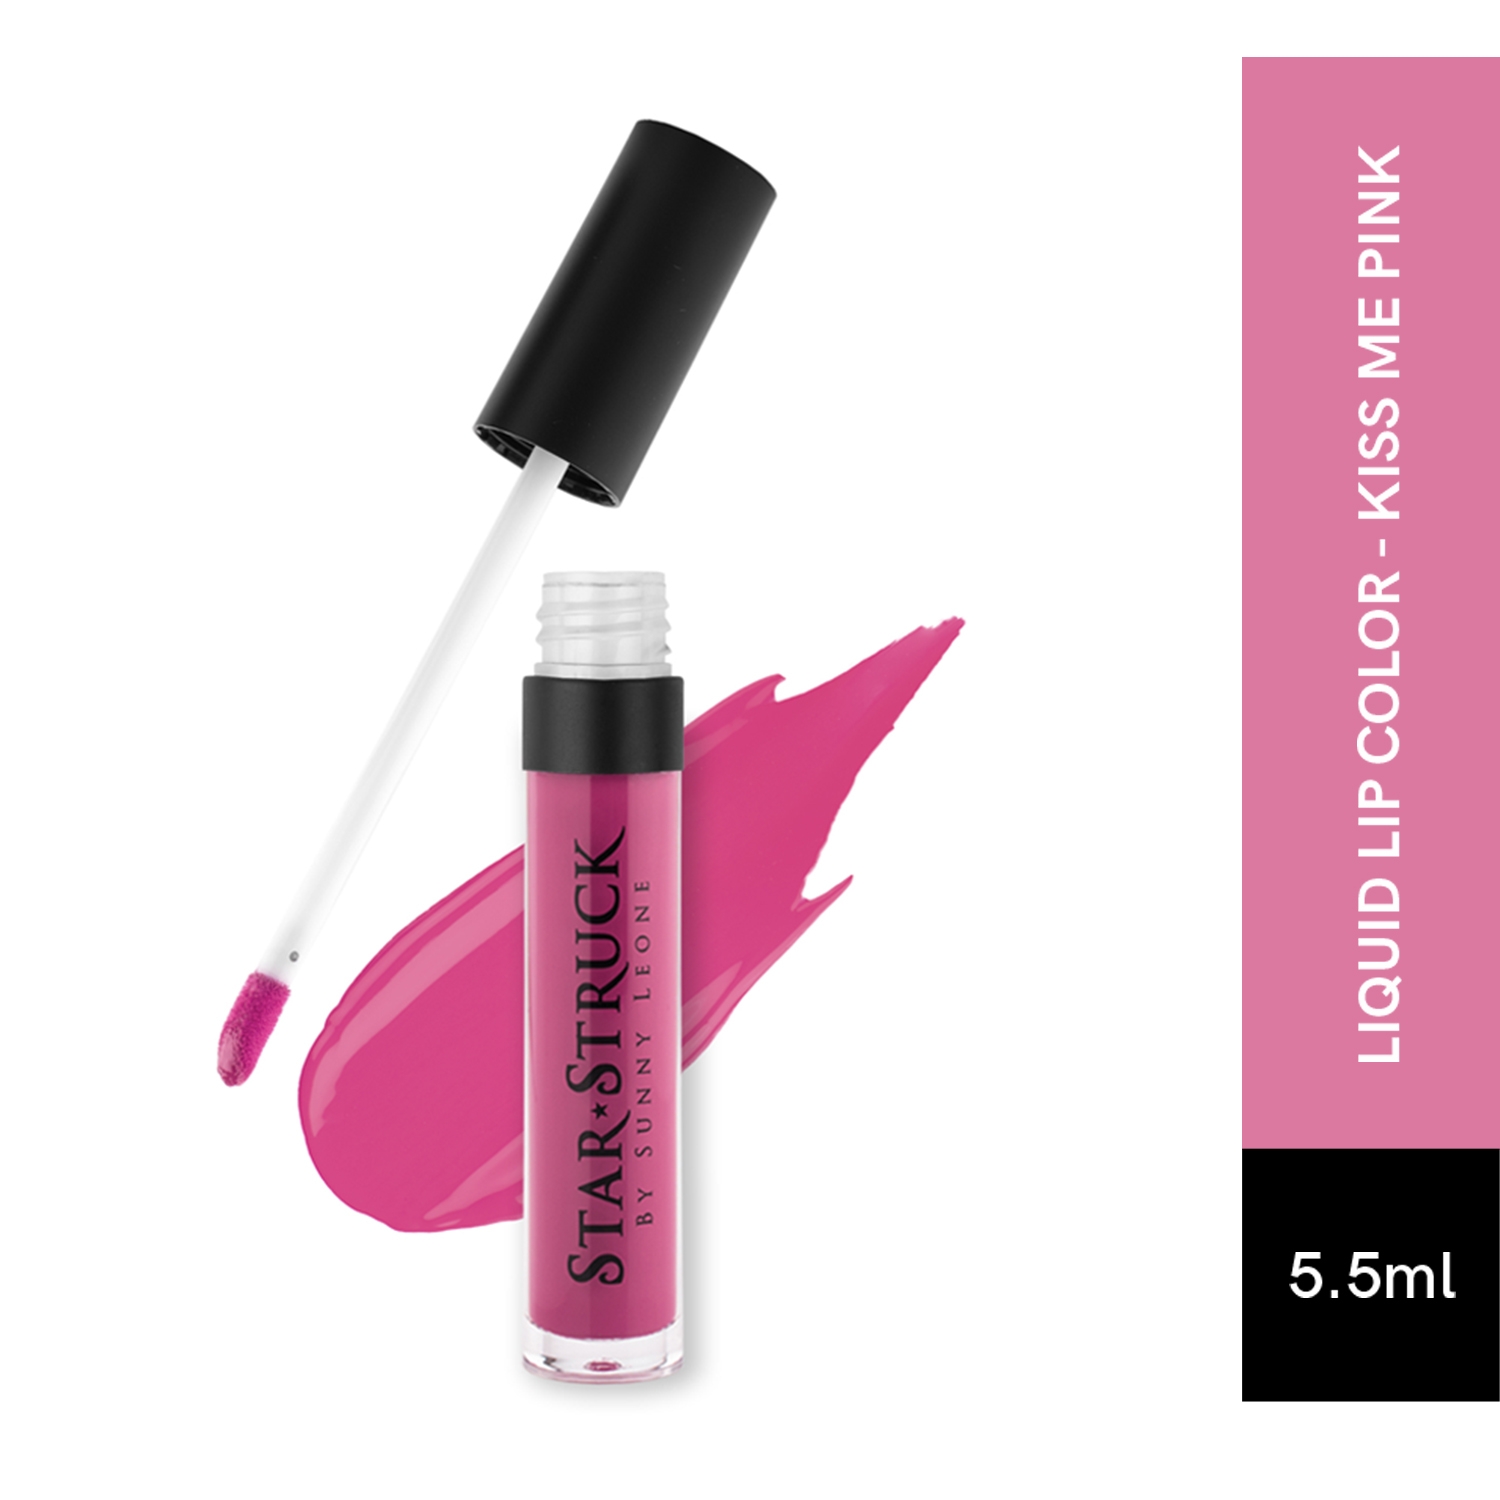 Star Struck by Sunny Leone | Star Struck by Sunny Leone Liquid Lip Color - Kiss Me Pink (5.5ml)